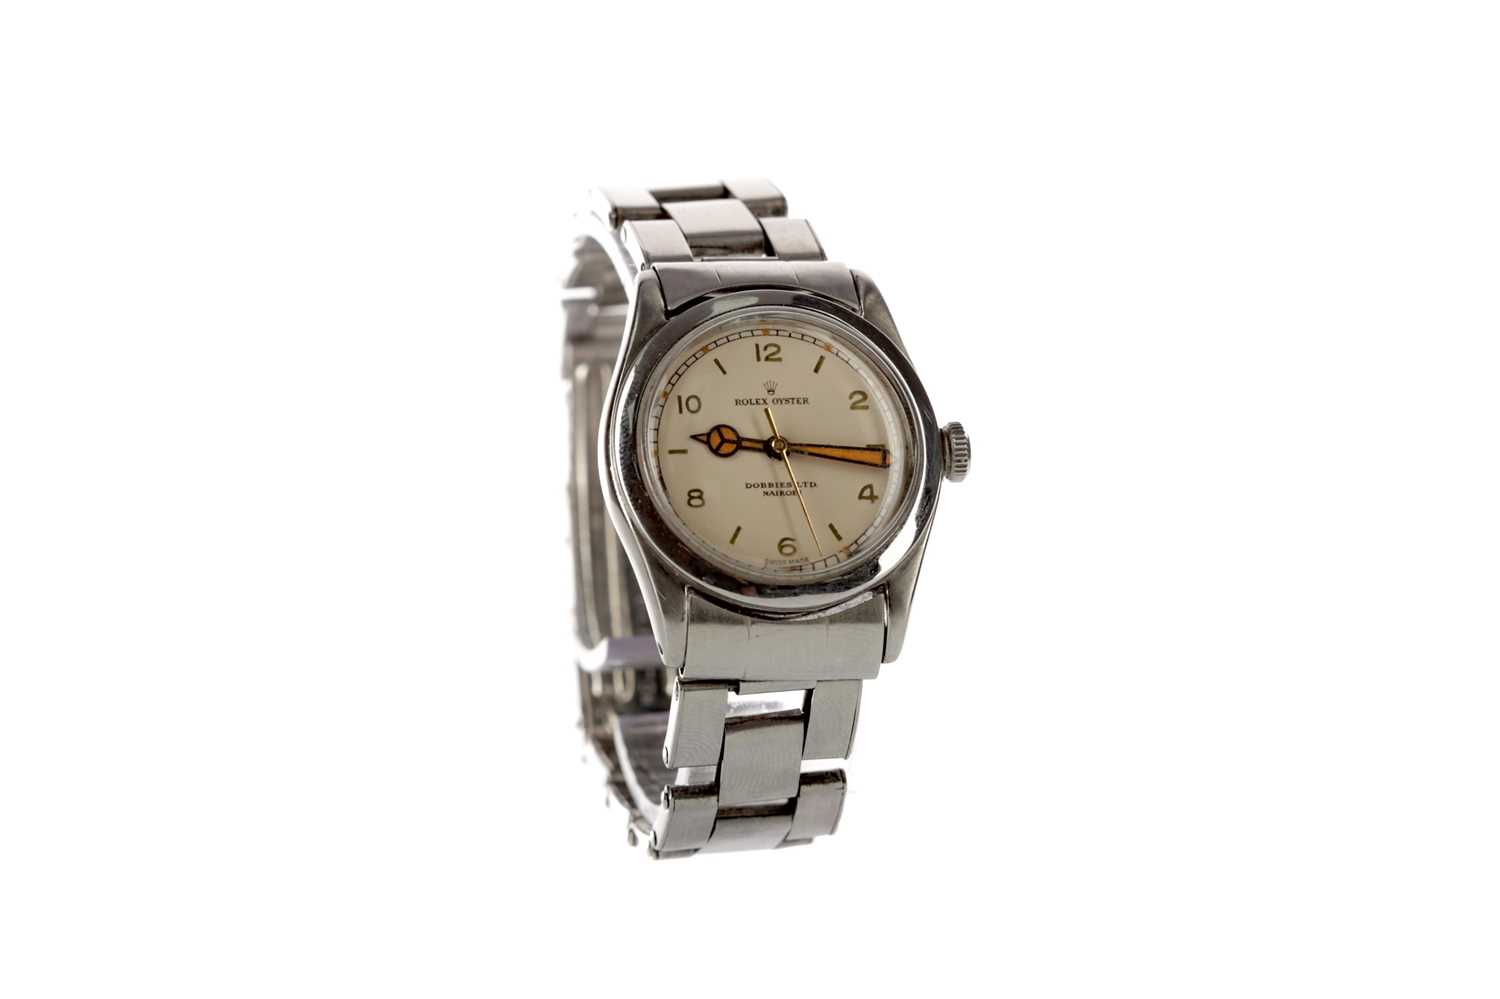 Lot 710 - A ROLEX OYSTER STAINLESS STEEL MANUAL WIND WRIST WATCH